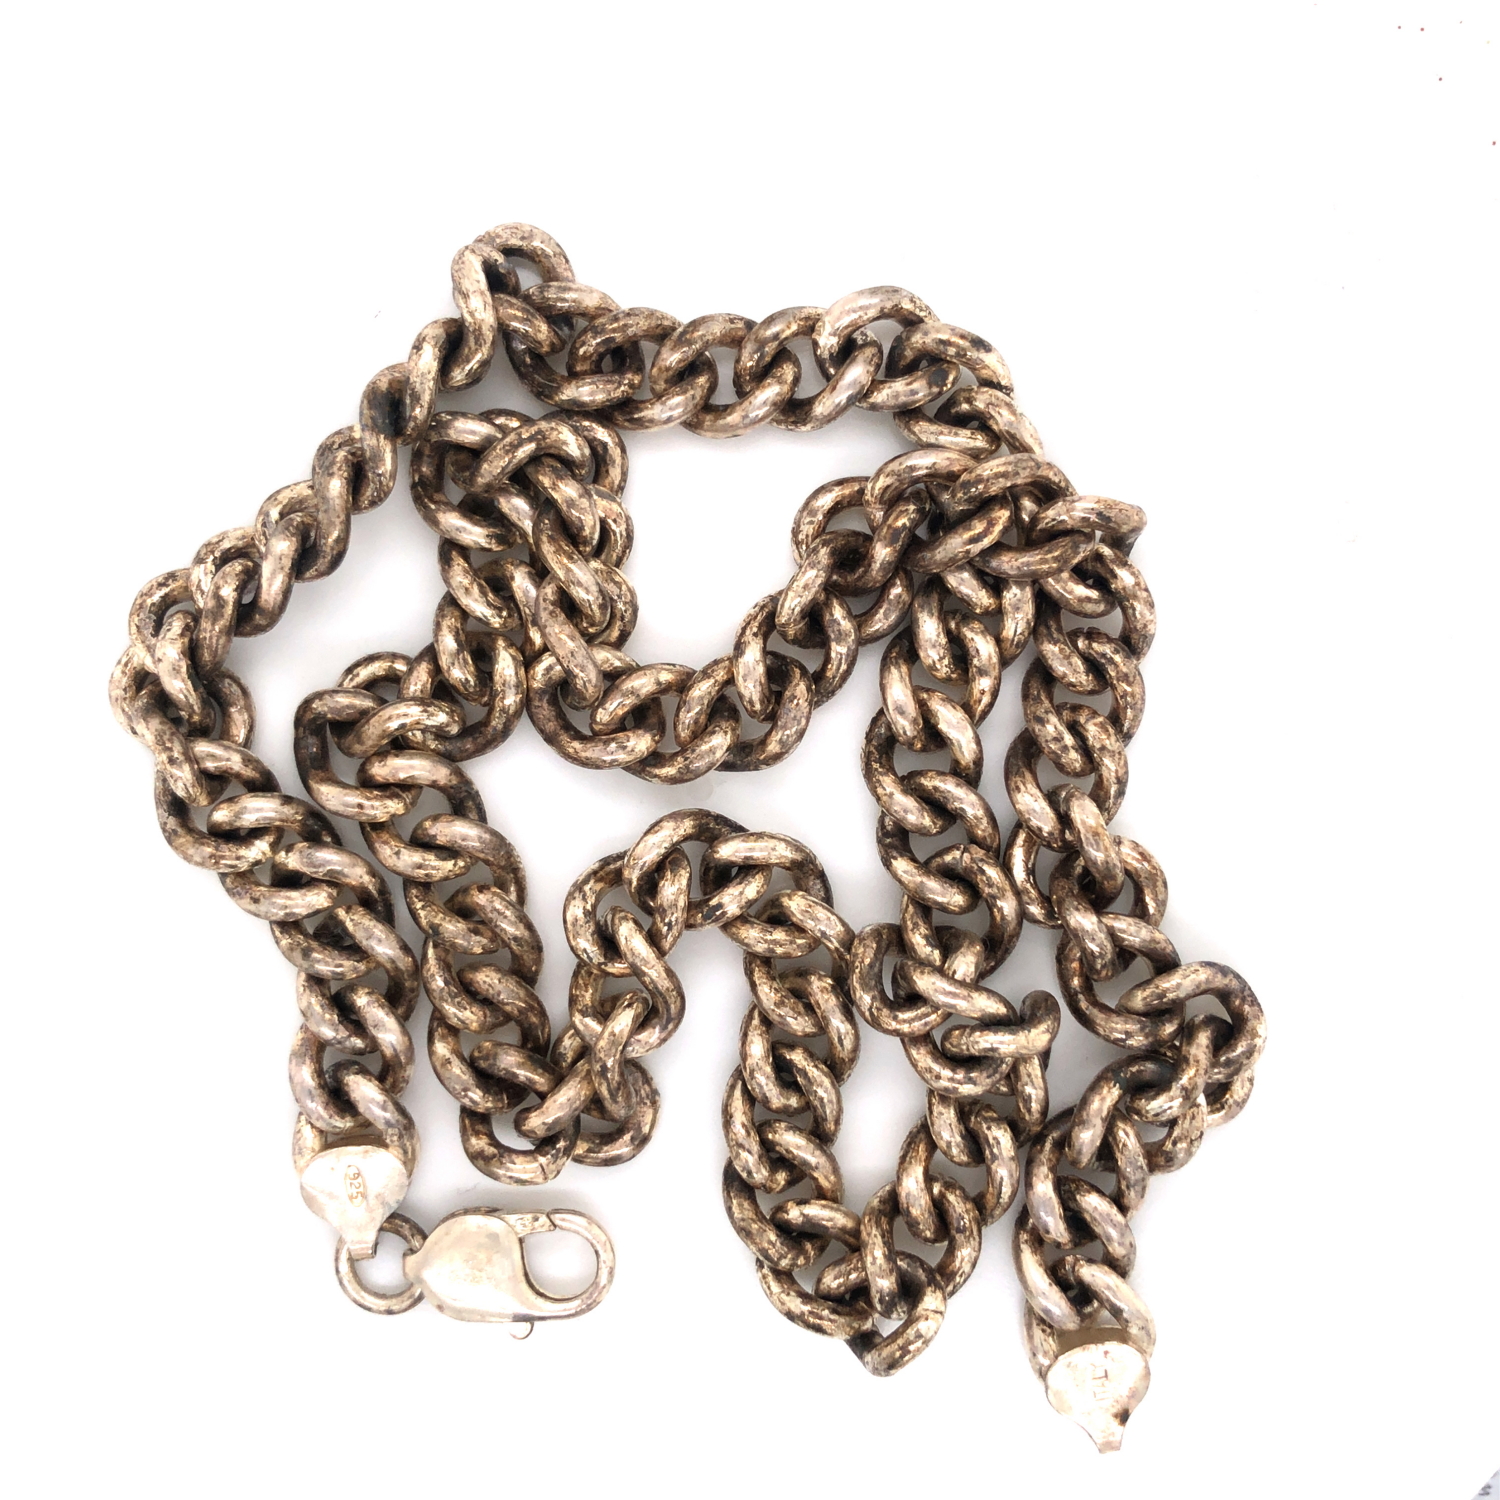 A HALLMARKED SILVER HEAVY CURB CHAIN. LENGTH 56cms, WEIGHT 113.55grms. - Image 3 of 3